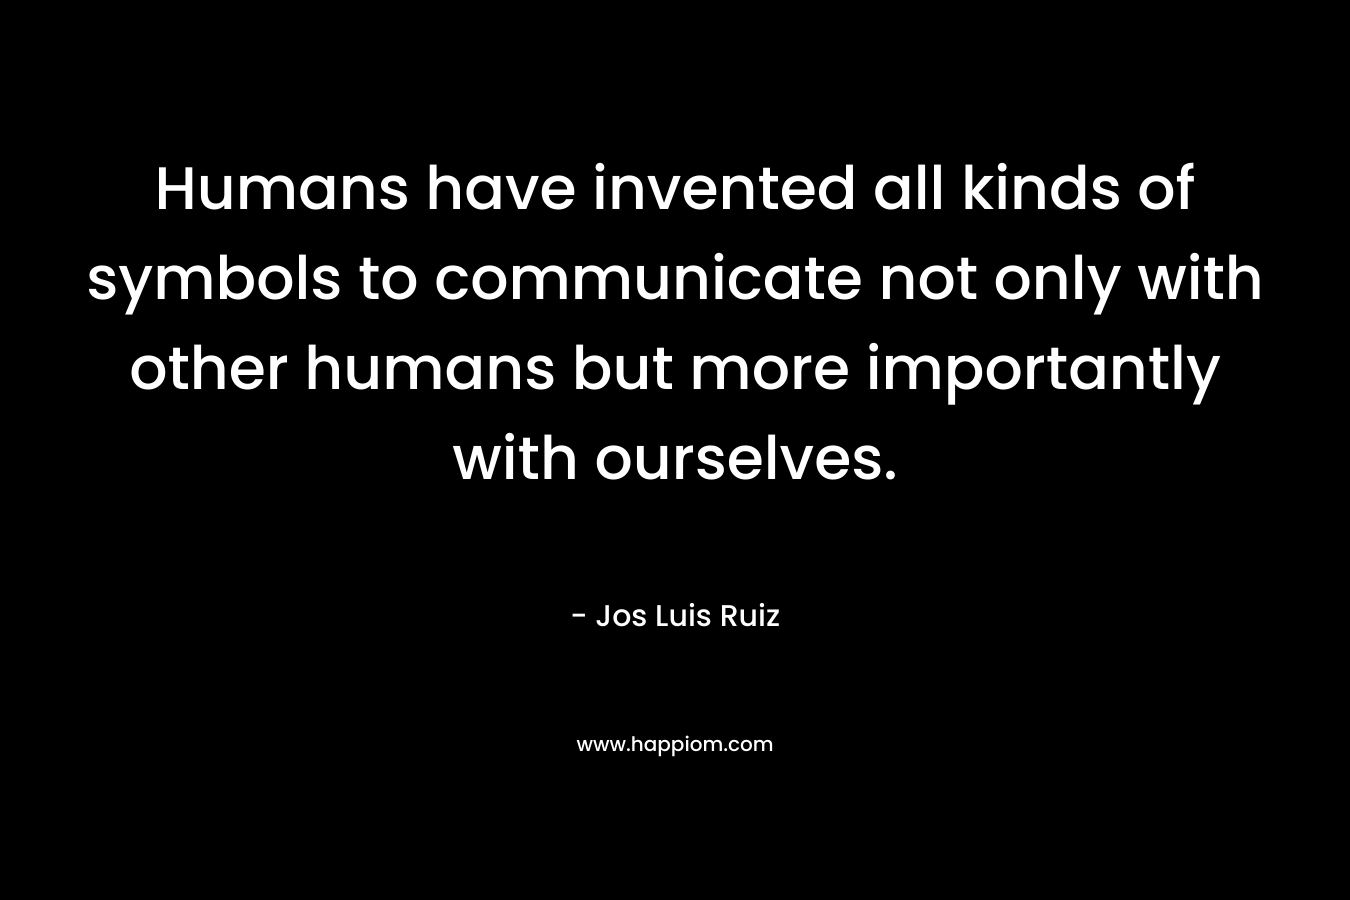 Humans have invented all kinds of symbols to communicate not only with other humans but more importantly with ourselves. – Jos Luis Ruiz